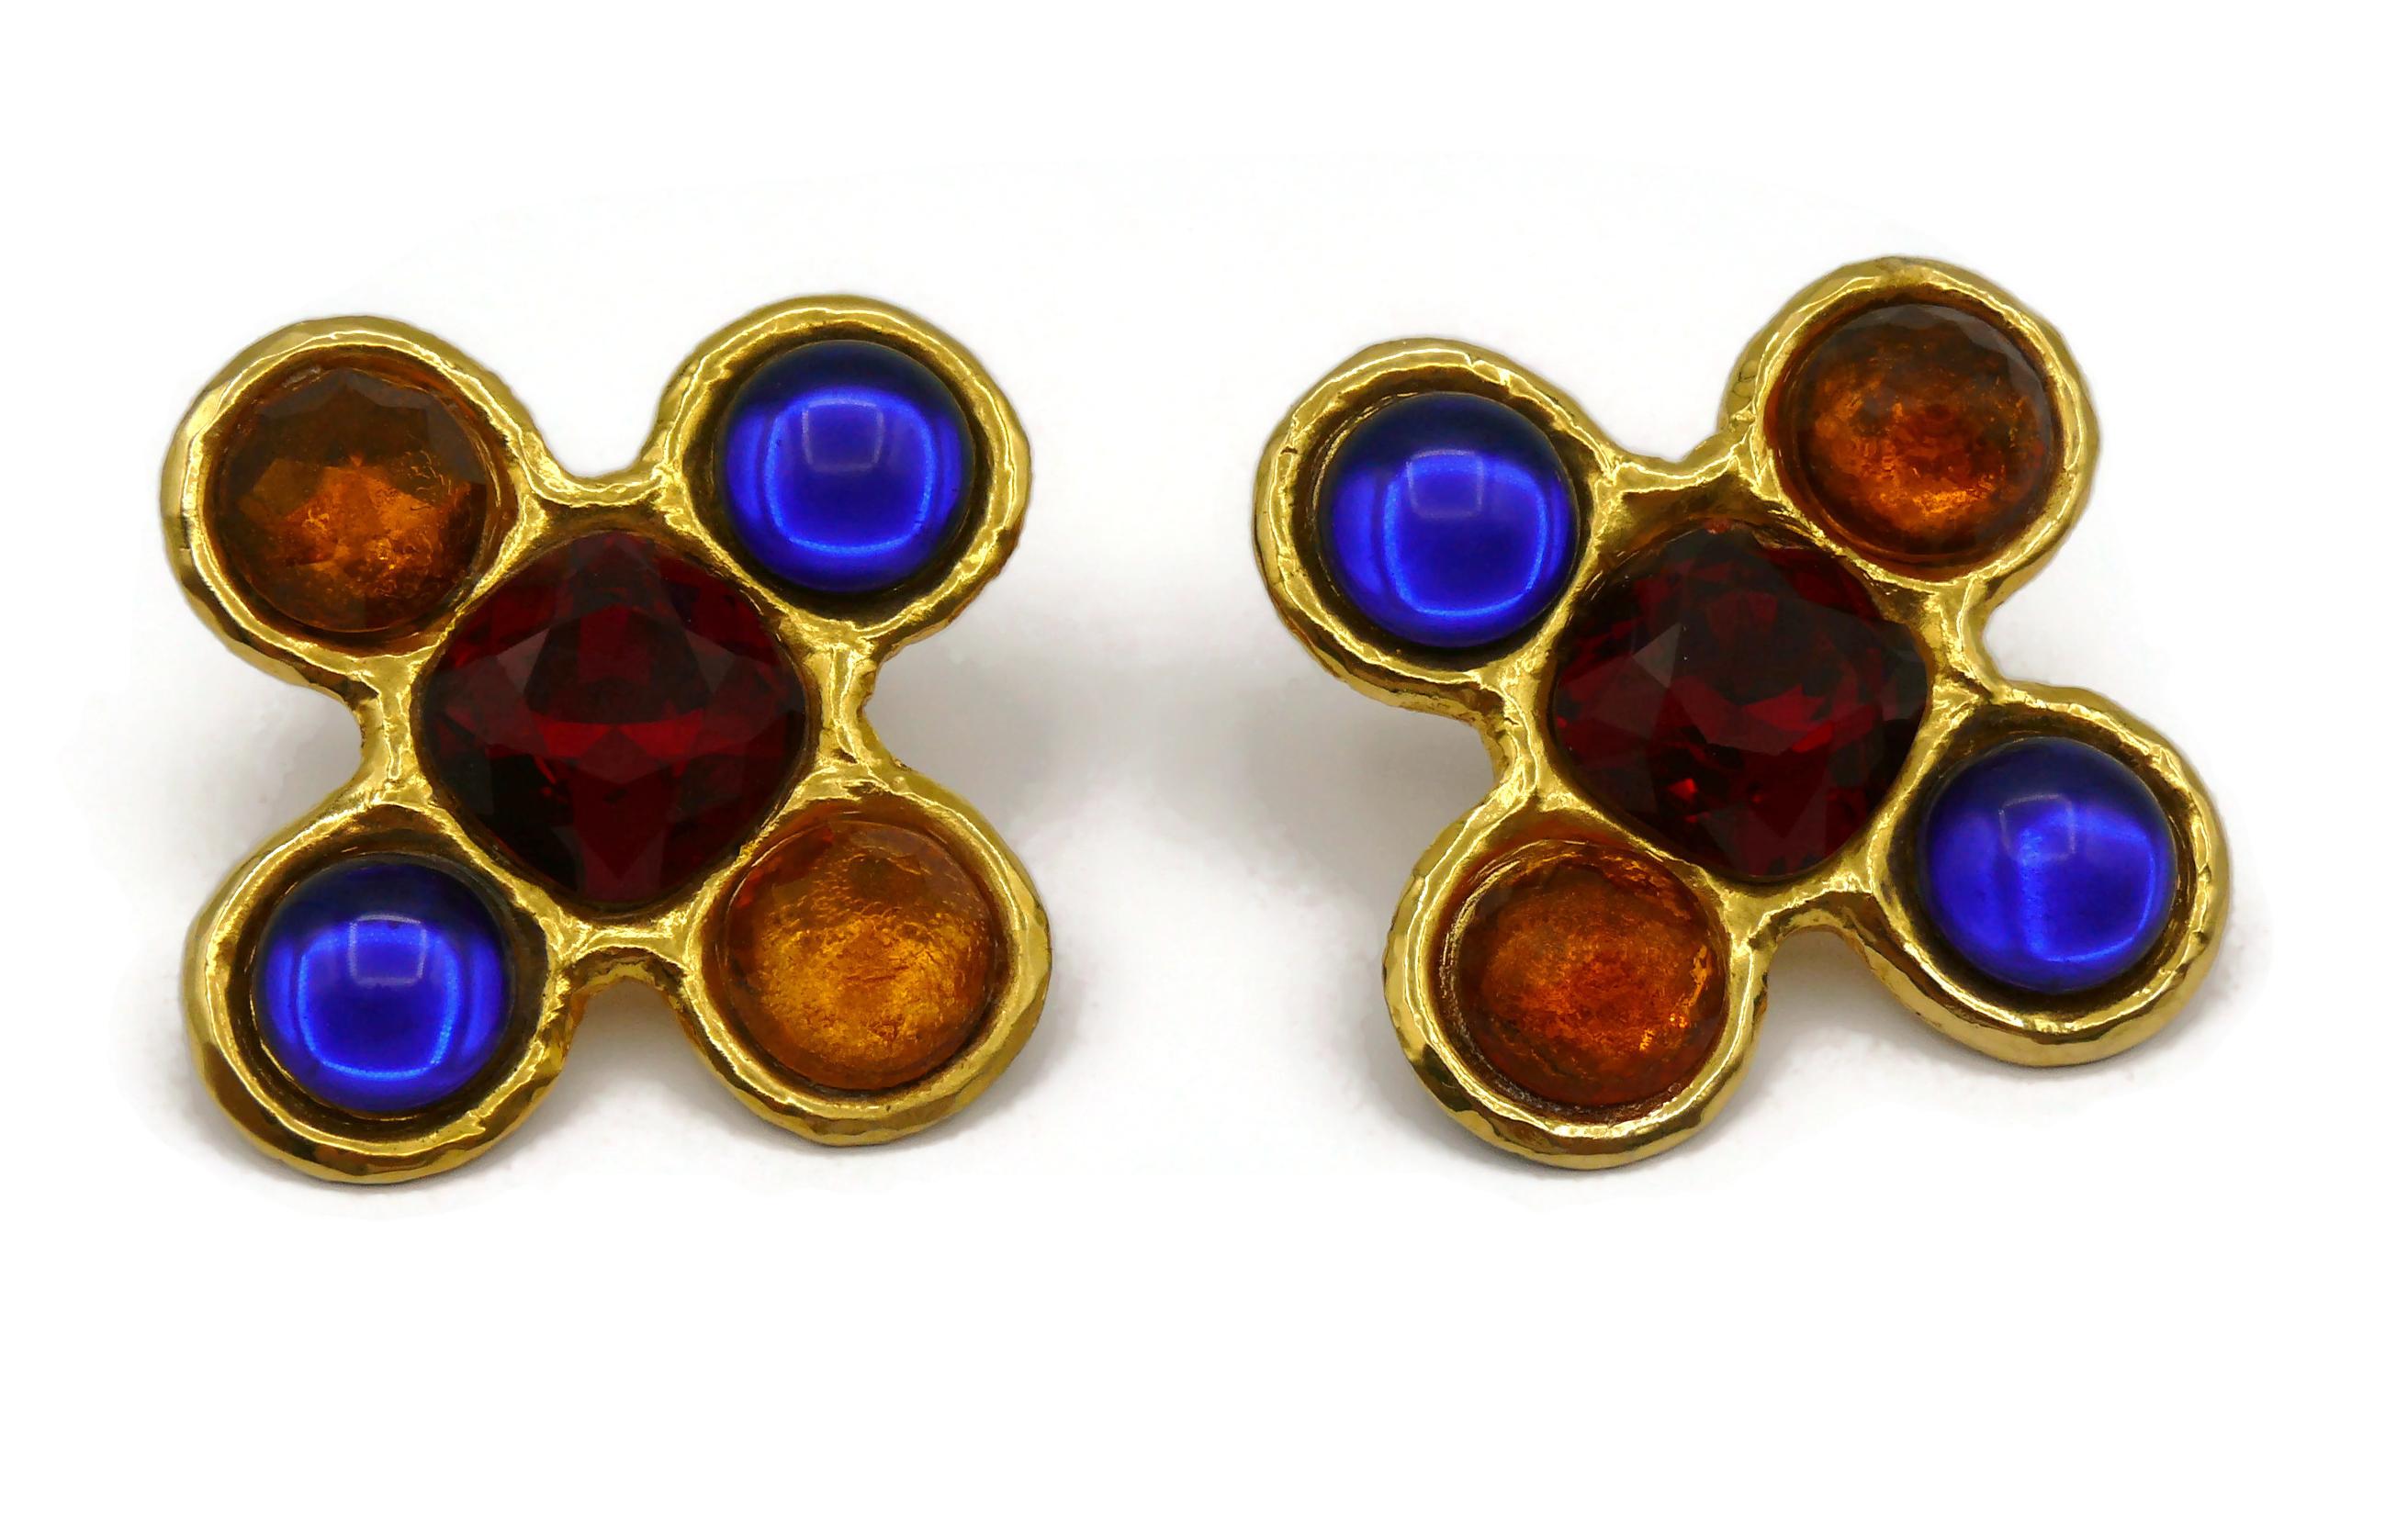 YVES SAINT LAURENT Rive Gauche Vintage Massive Jewelled Cross Clip-On Earrings In Good Condition For Sale In Nice, FR